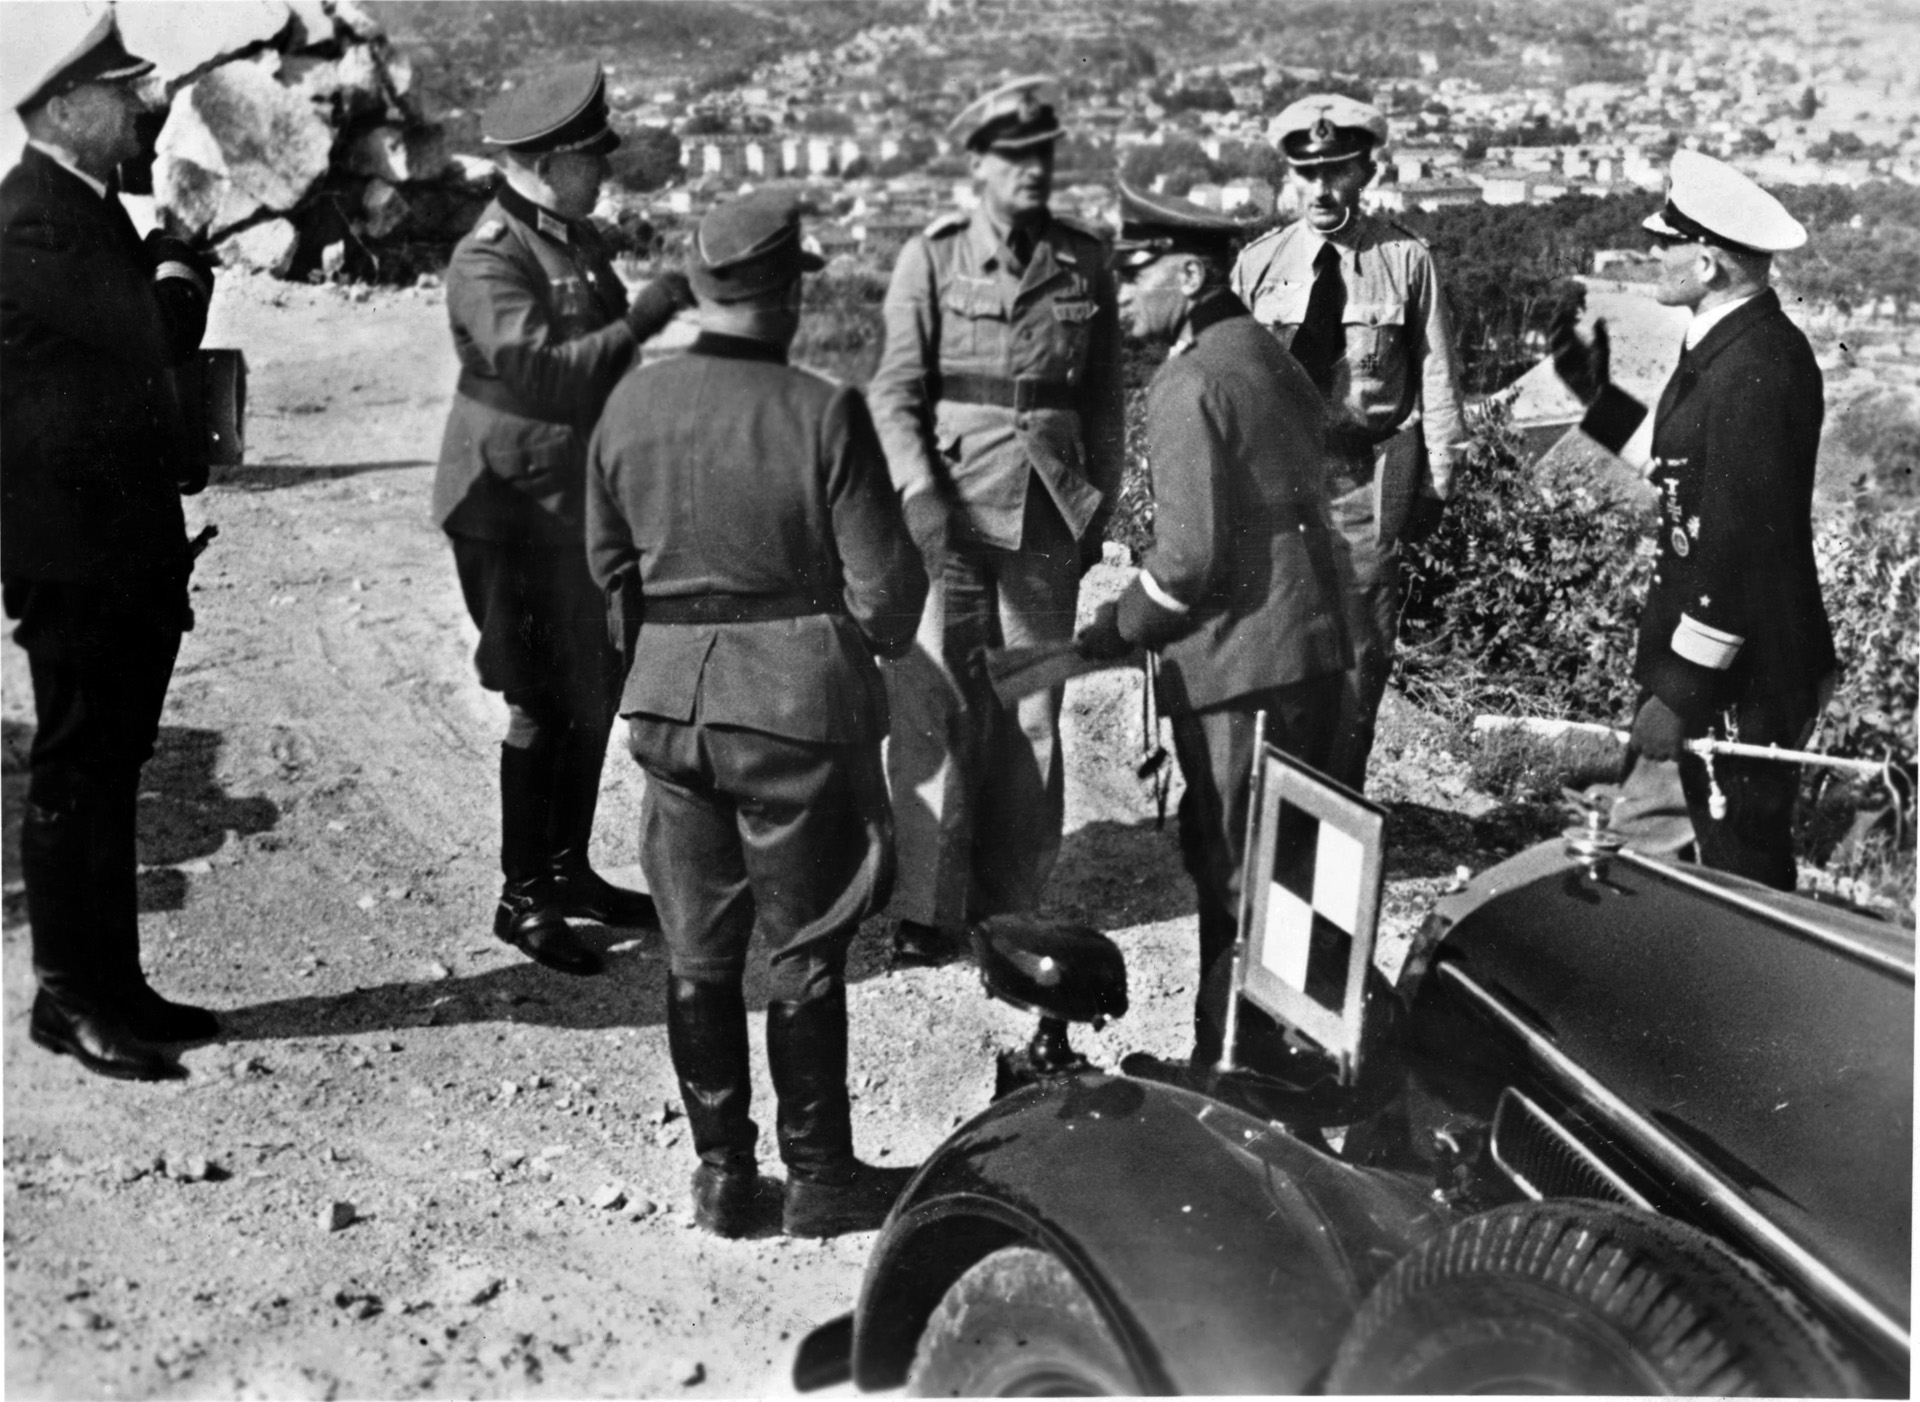 Major General Johannes Blaskowitz (center) inspects coastal defenses in southern France in June 1944, two months before the Allied landings in the area.